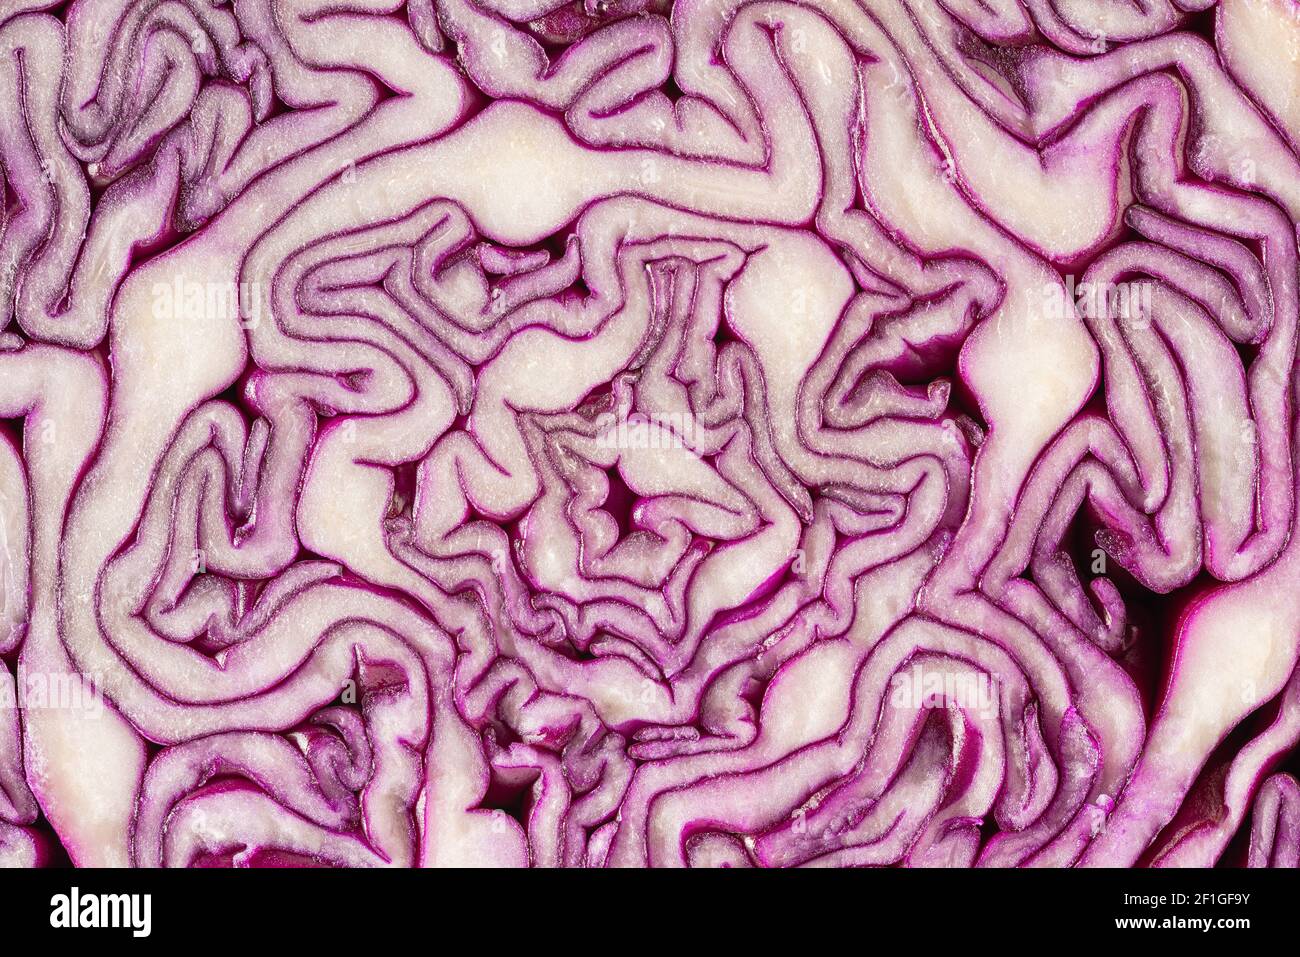 Red Cabbage textured background. Red cabbage pattern close-up. Macro photo. Stock Photo